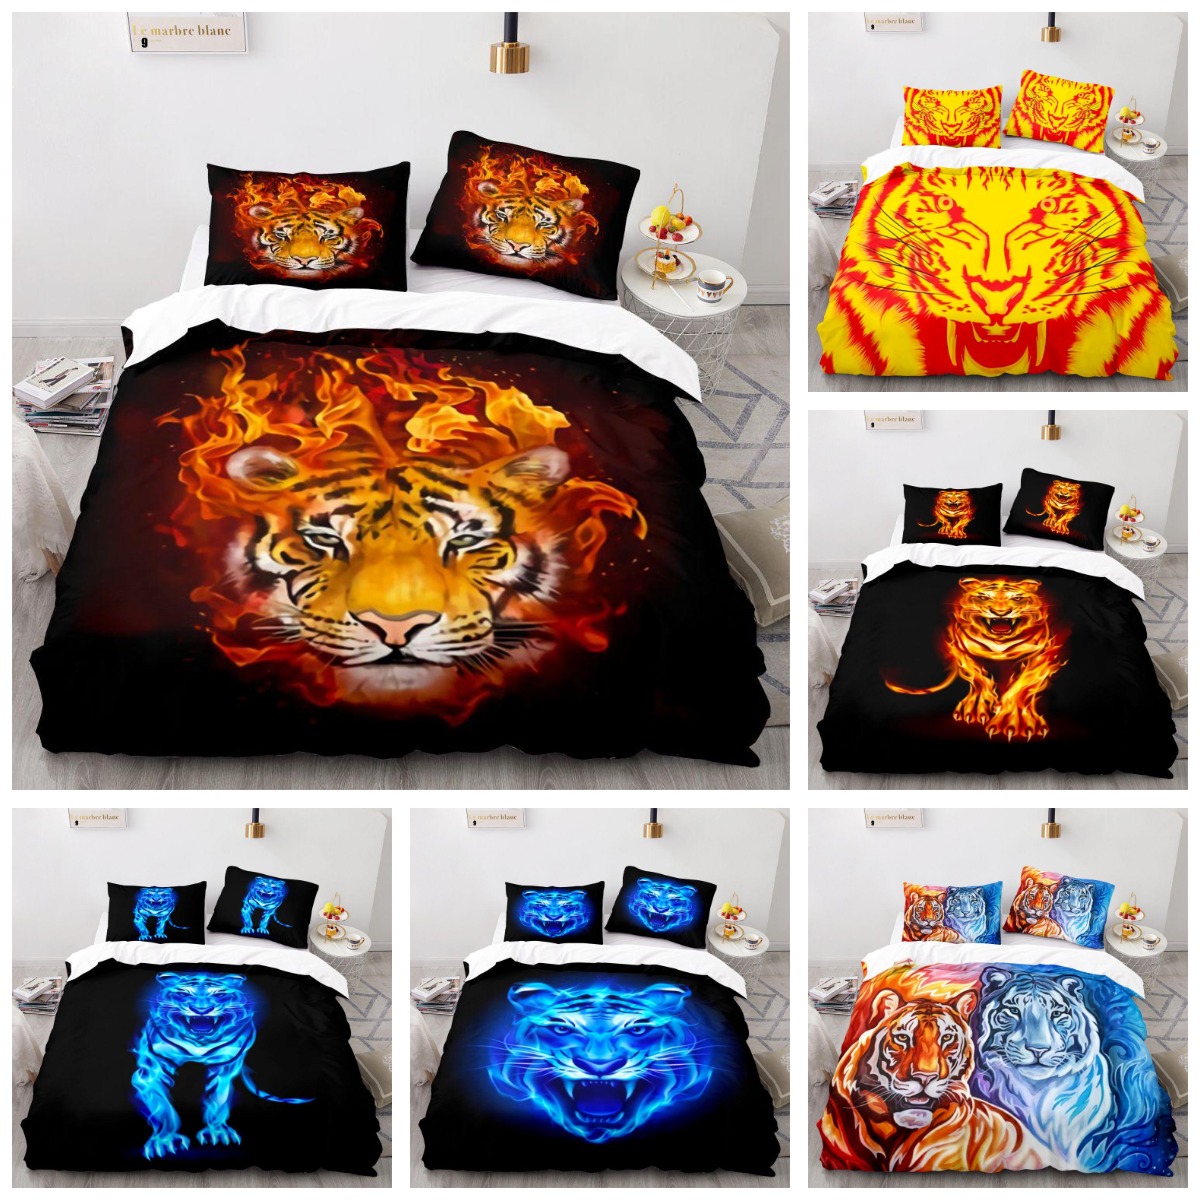 3D Duvet Cover Sets Fire Tiger Super Soft Polyester Quilt Cover with Pillowcase Bedding Set